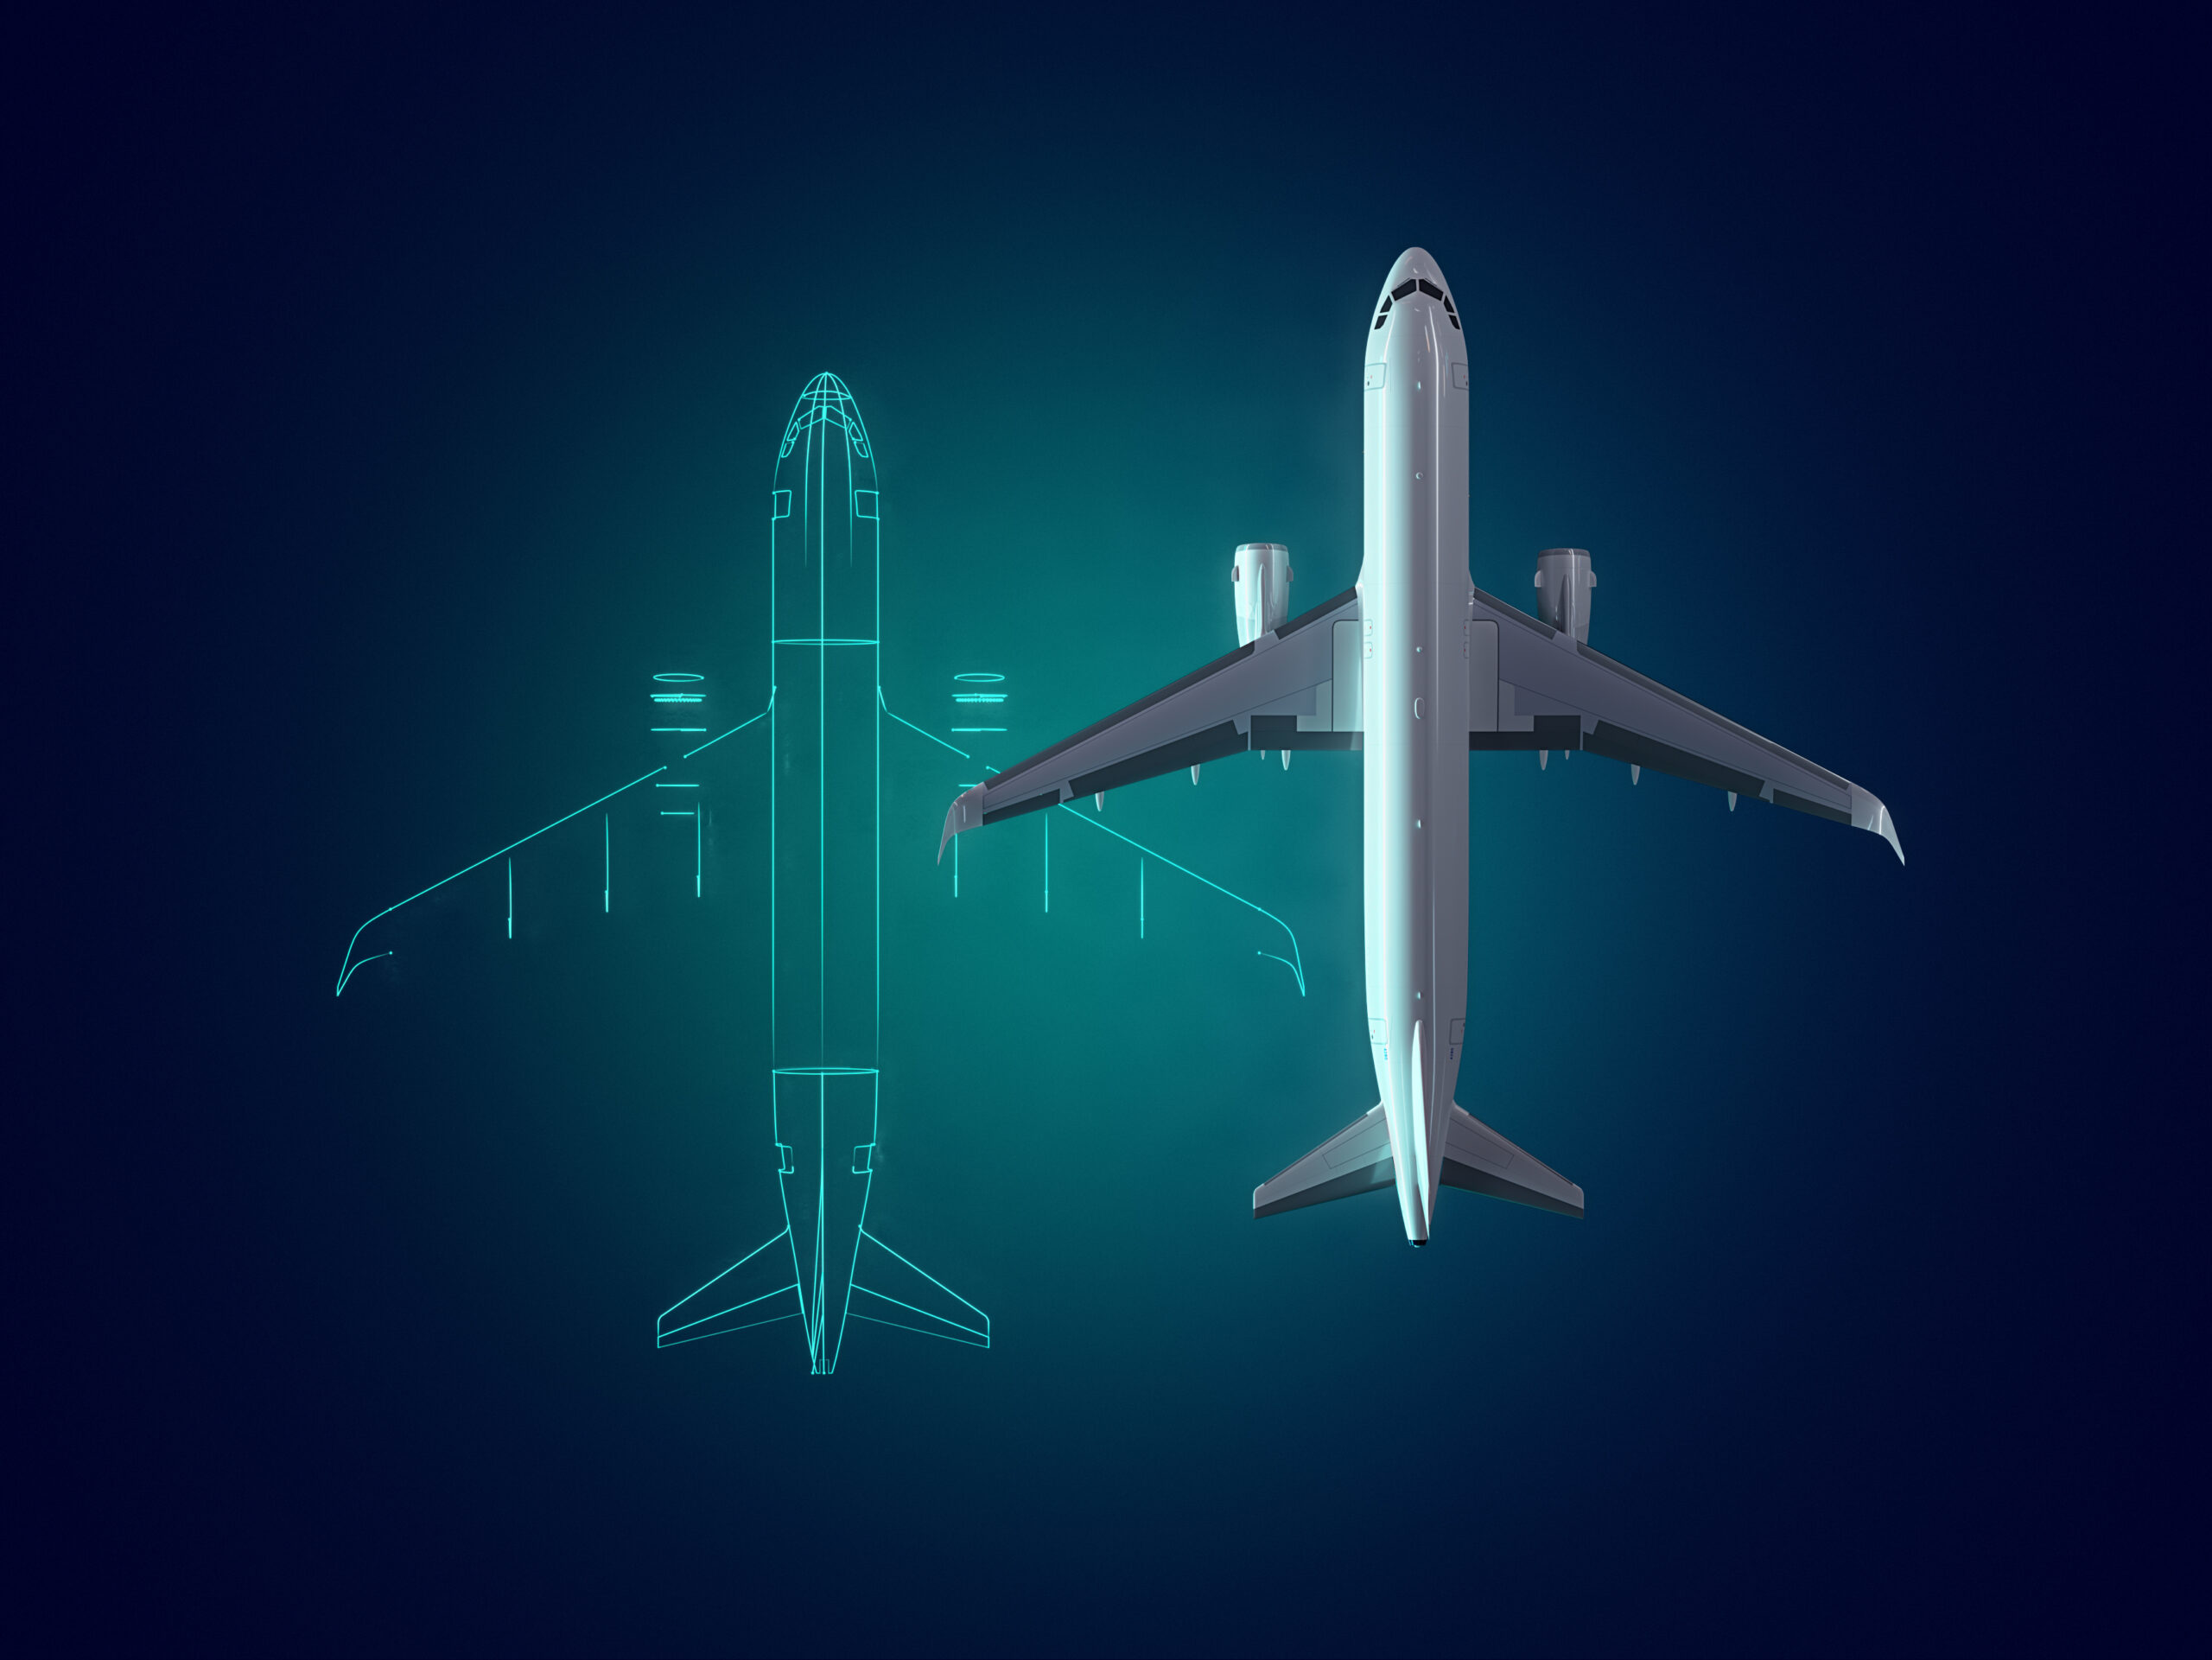 Two aircraft representing a digital twin model and a physical model